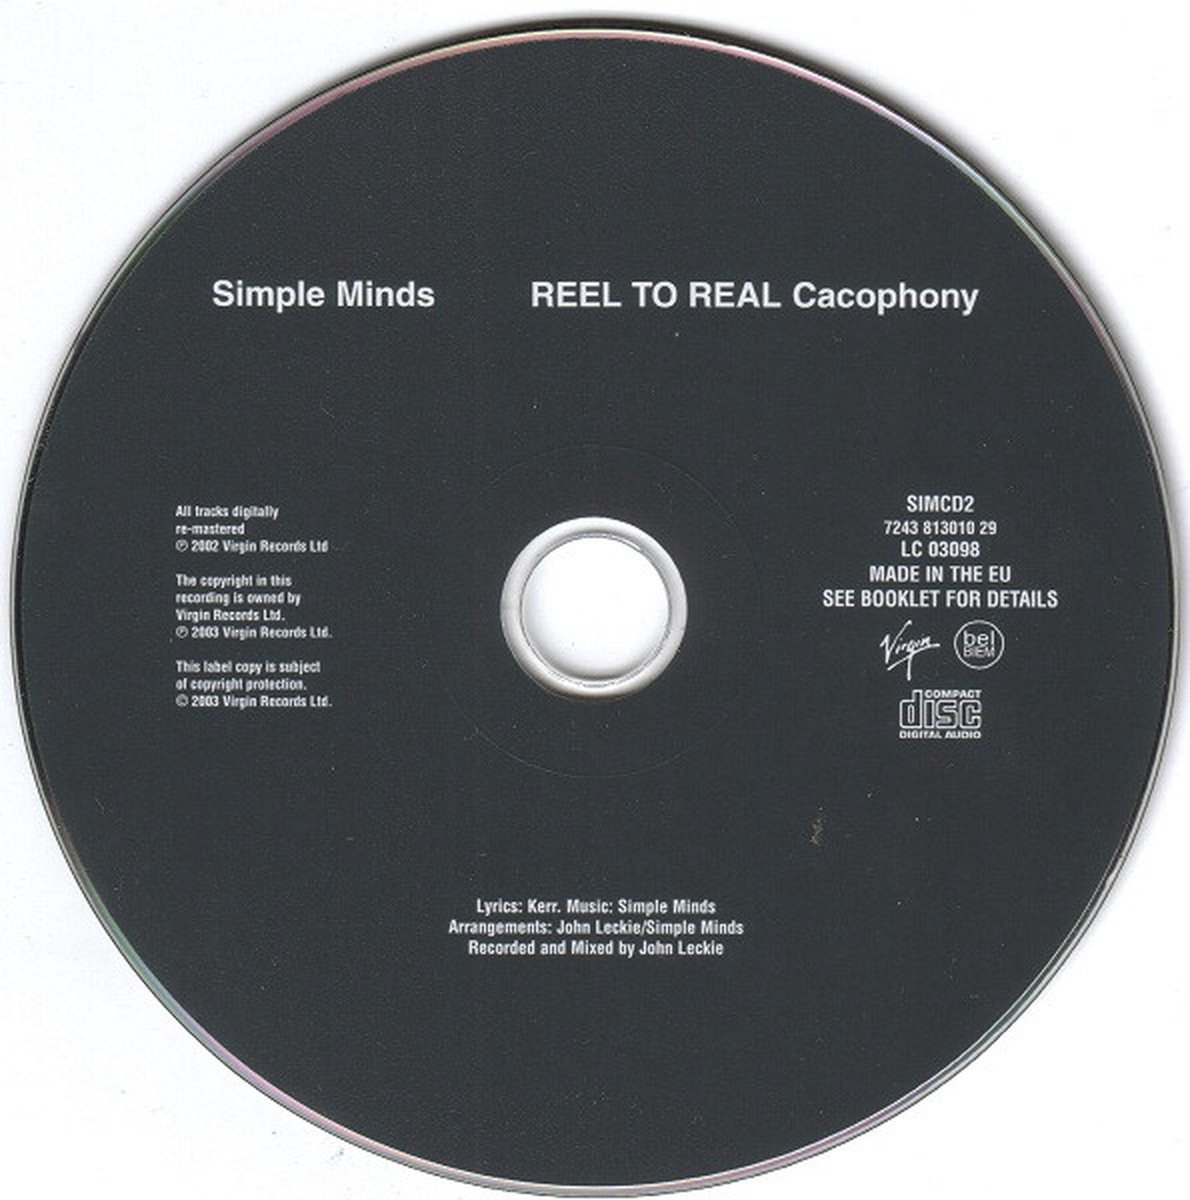 Reel to Real Cacophony by Simple Minds (Album; Disky; VI 874782